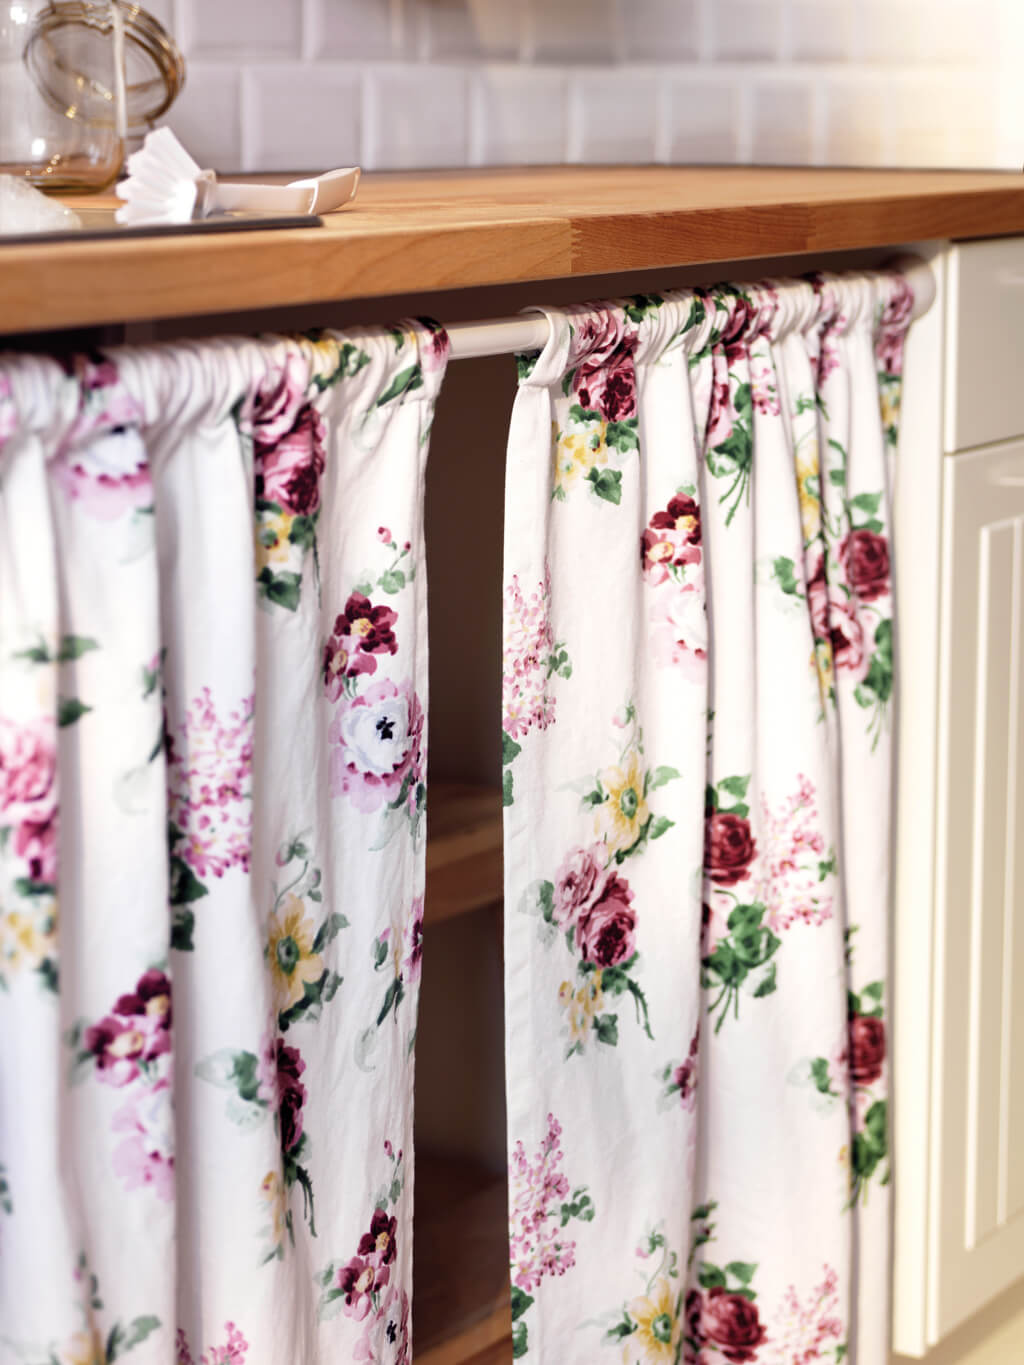 Easy Recessed Cabinet Curtain With Floral Fabric